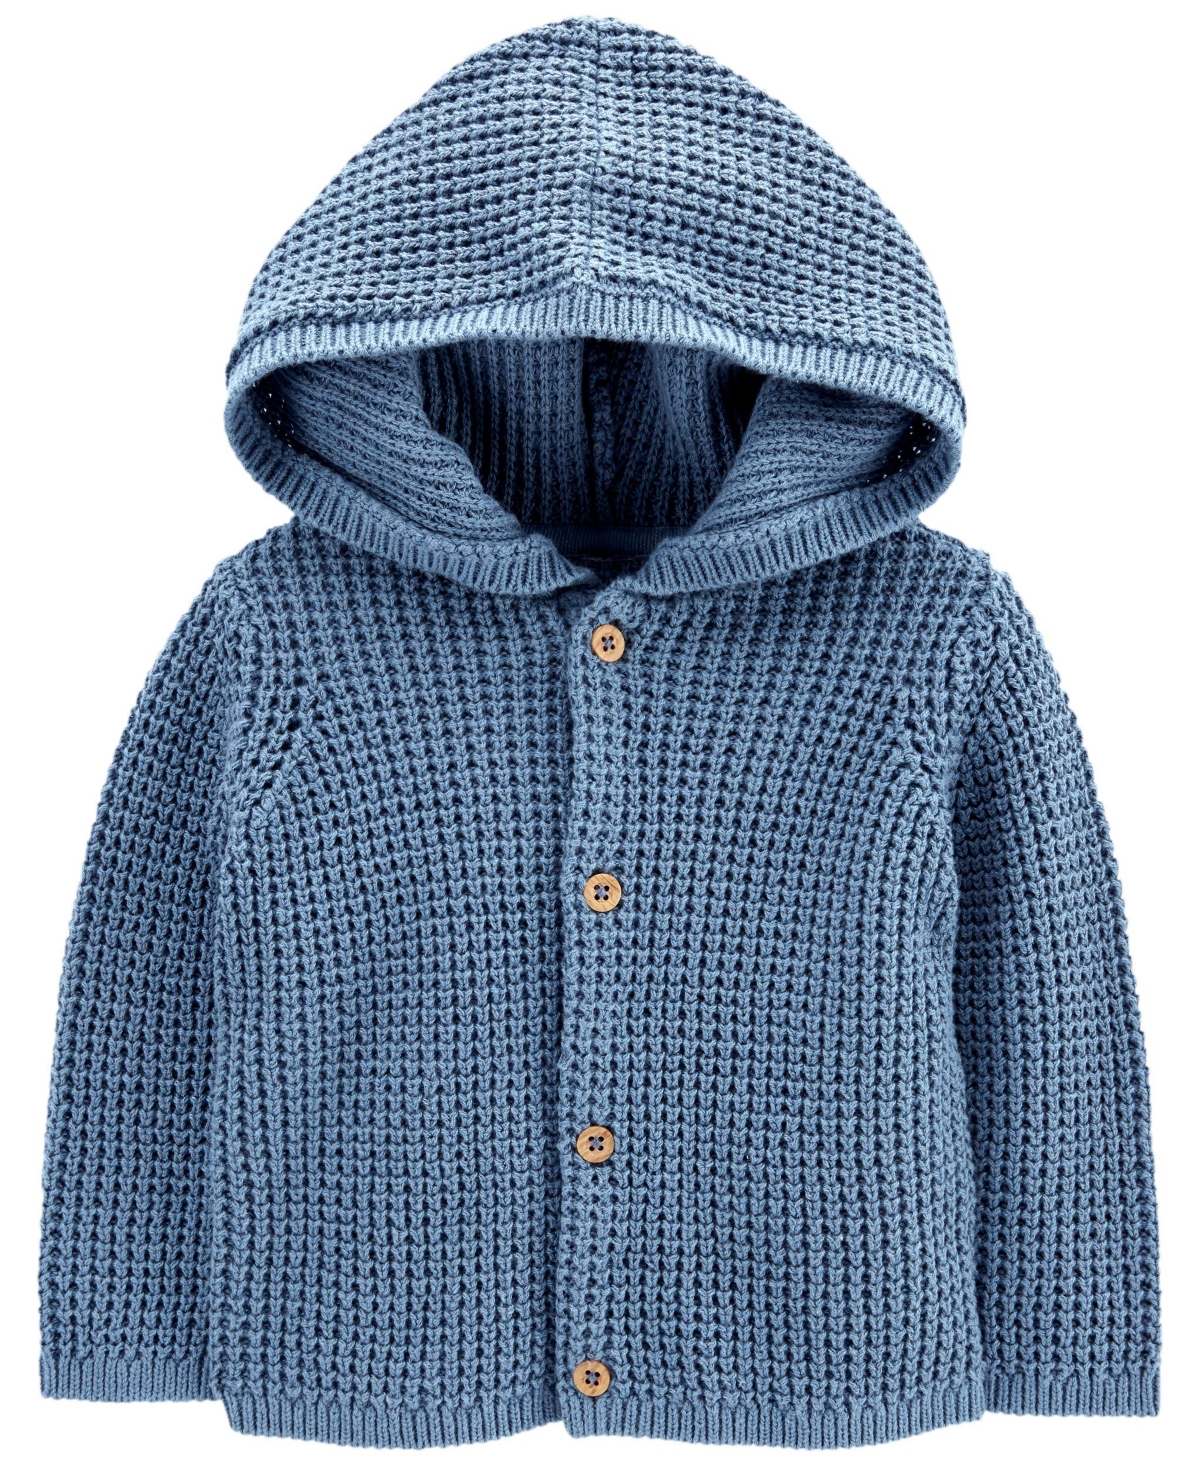 Carter's Kids' Baby Boys Hooded Cotton Cardigan In Blue